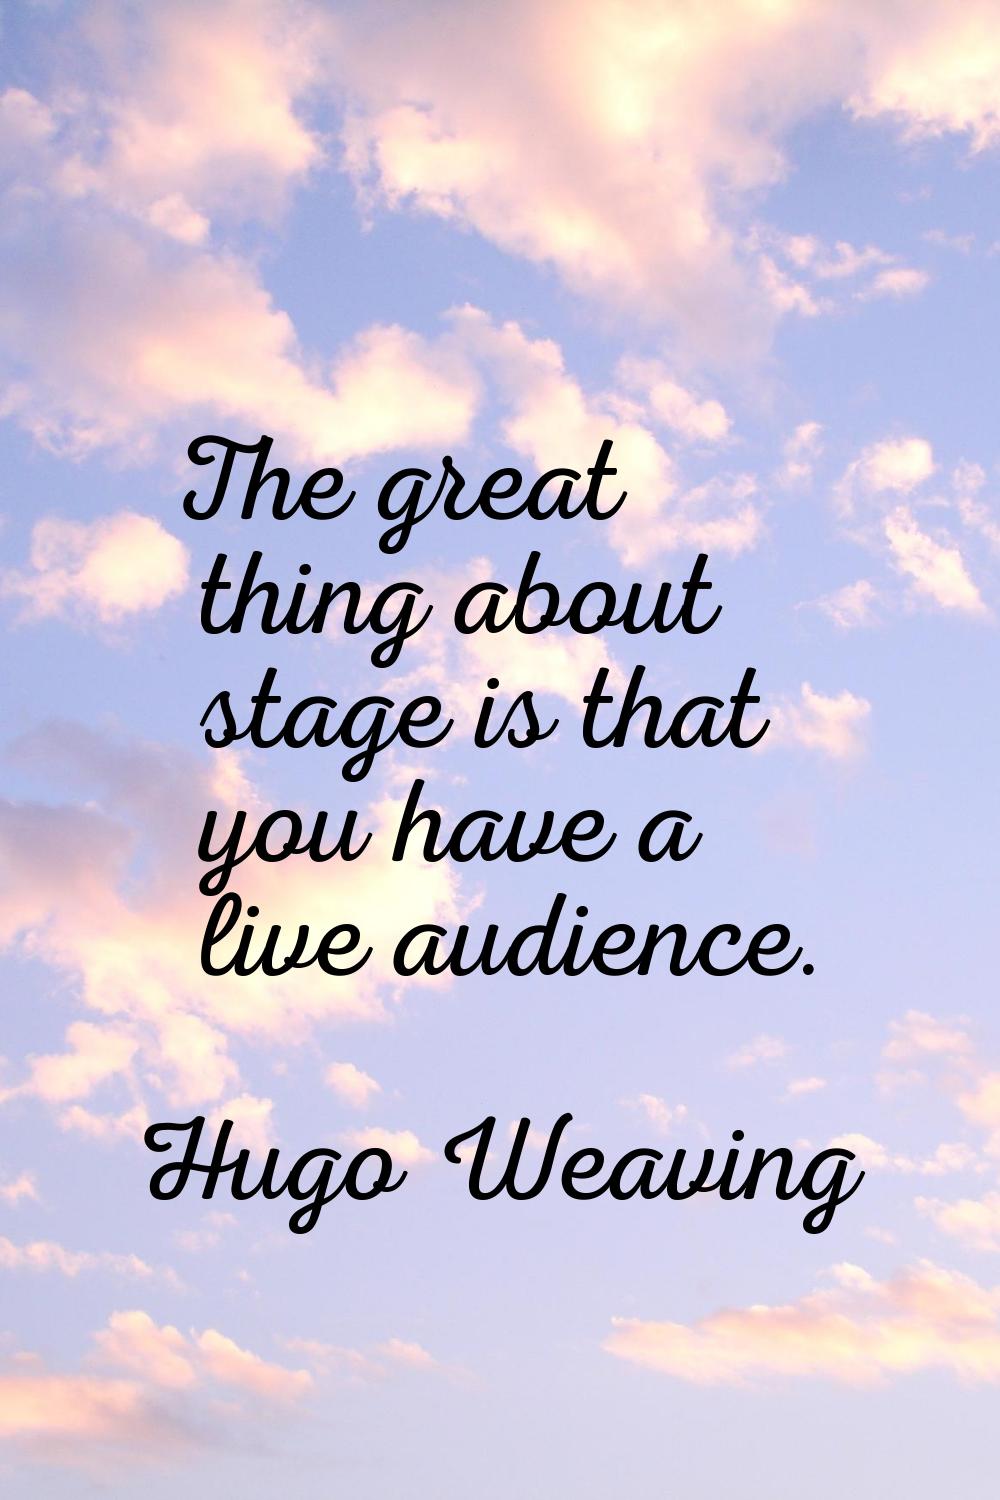 The great thing about stage is that you have a live audience.